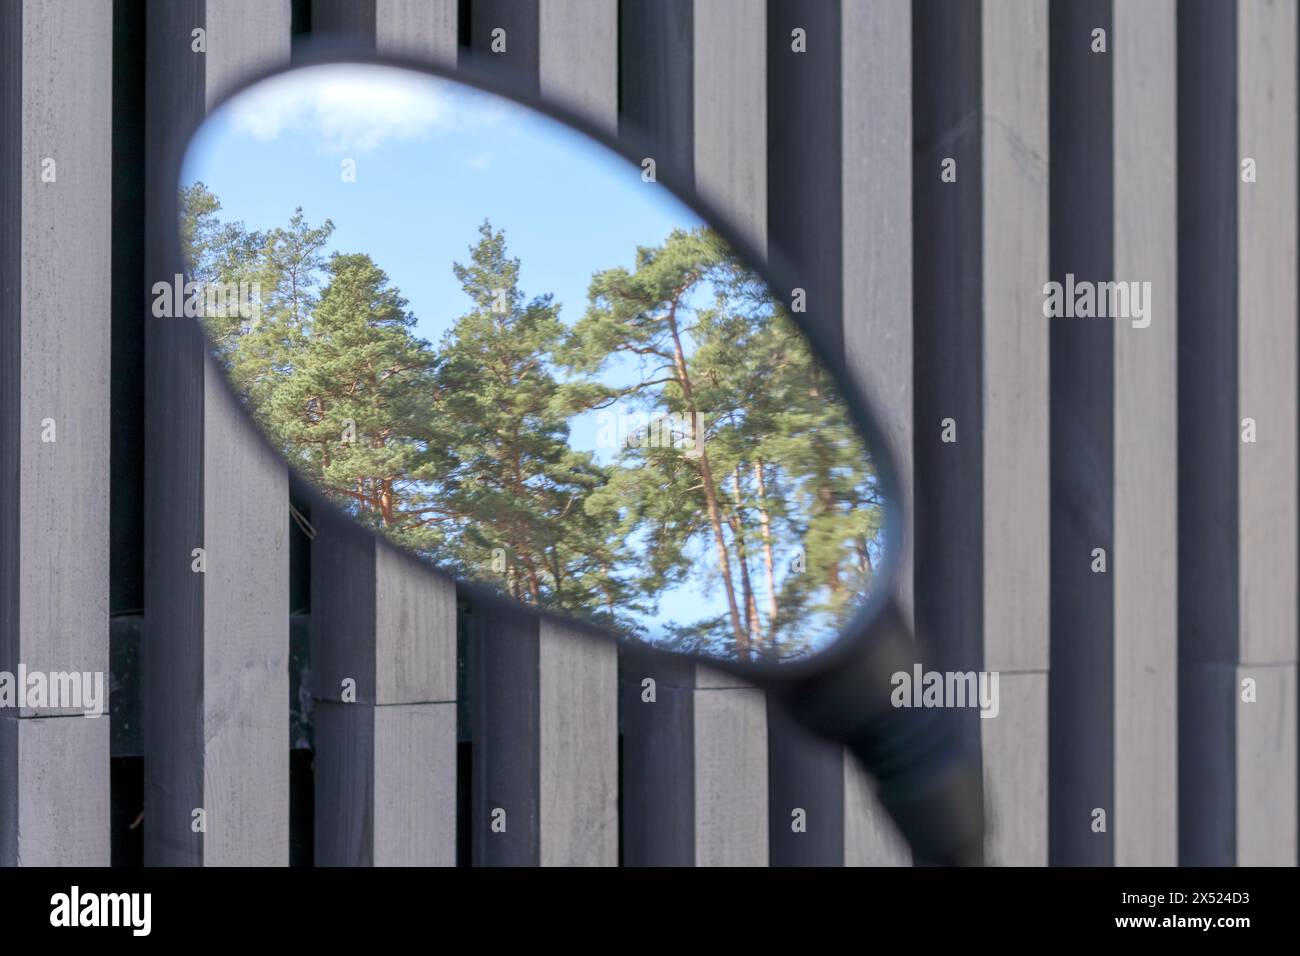 close-up of an oval mirror with a background of trees in it Stock Photo